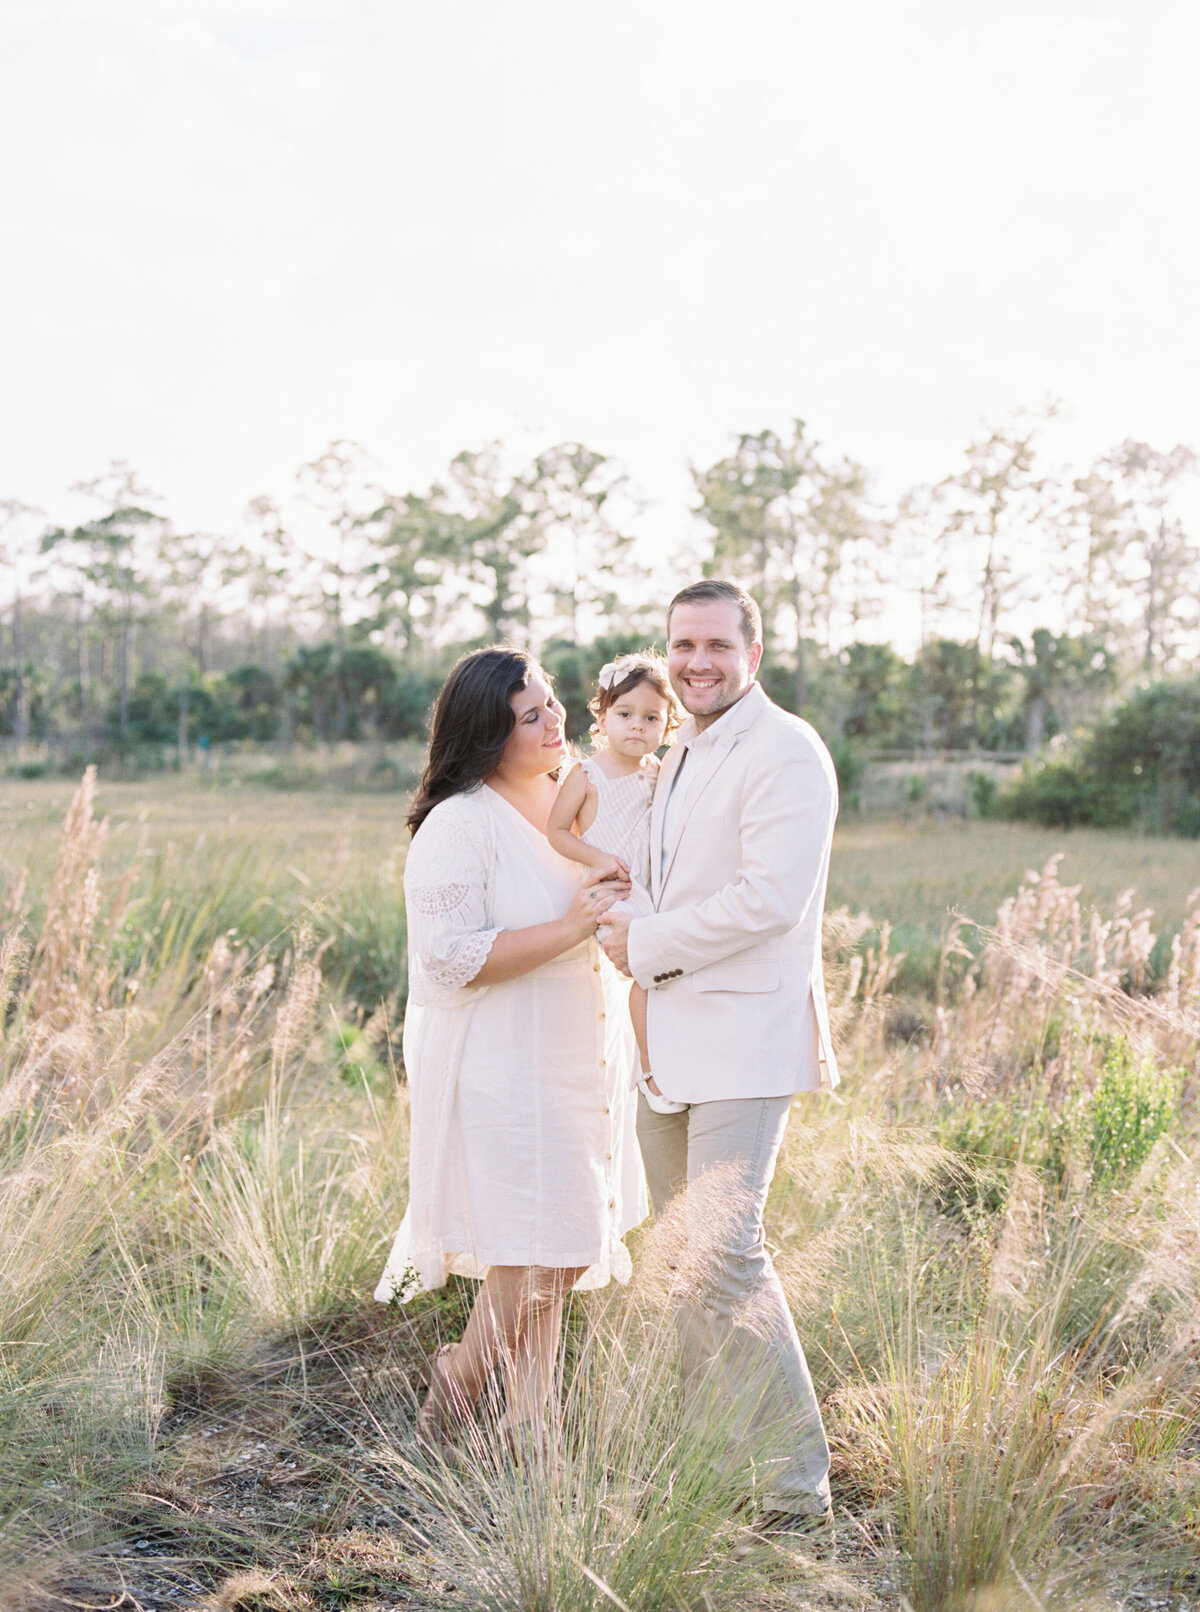 Natural Organic Field Earthy Neutral Family Session Jupiter Florida FIlm Photographer-3